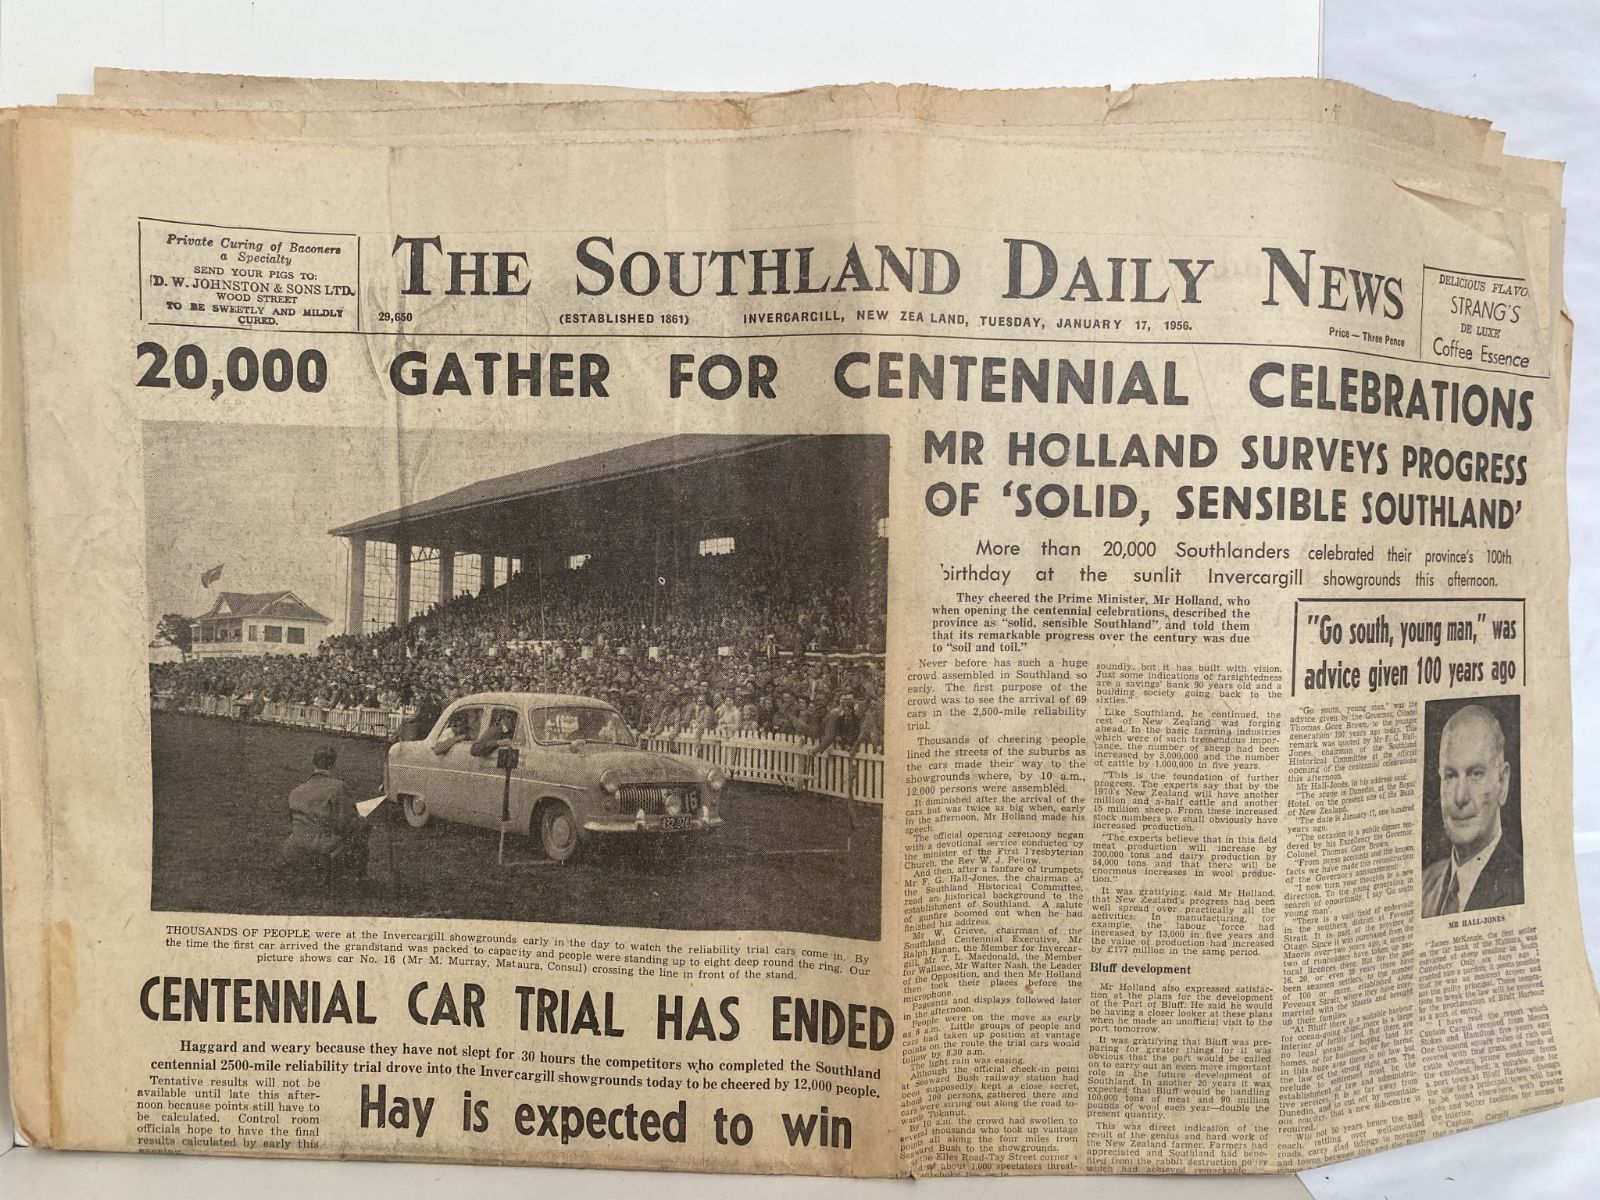 OLD NEWSPAPER: The Southland Times, 17 January 1956 - Centennial Celebrations